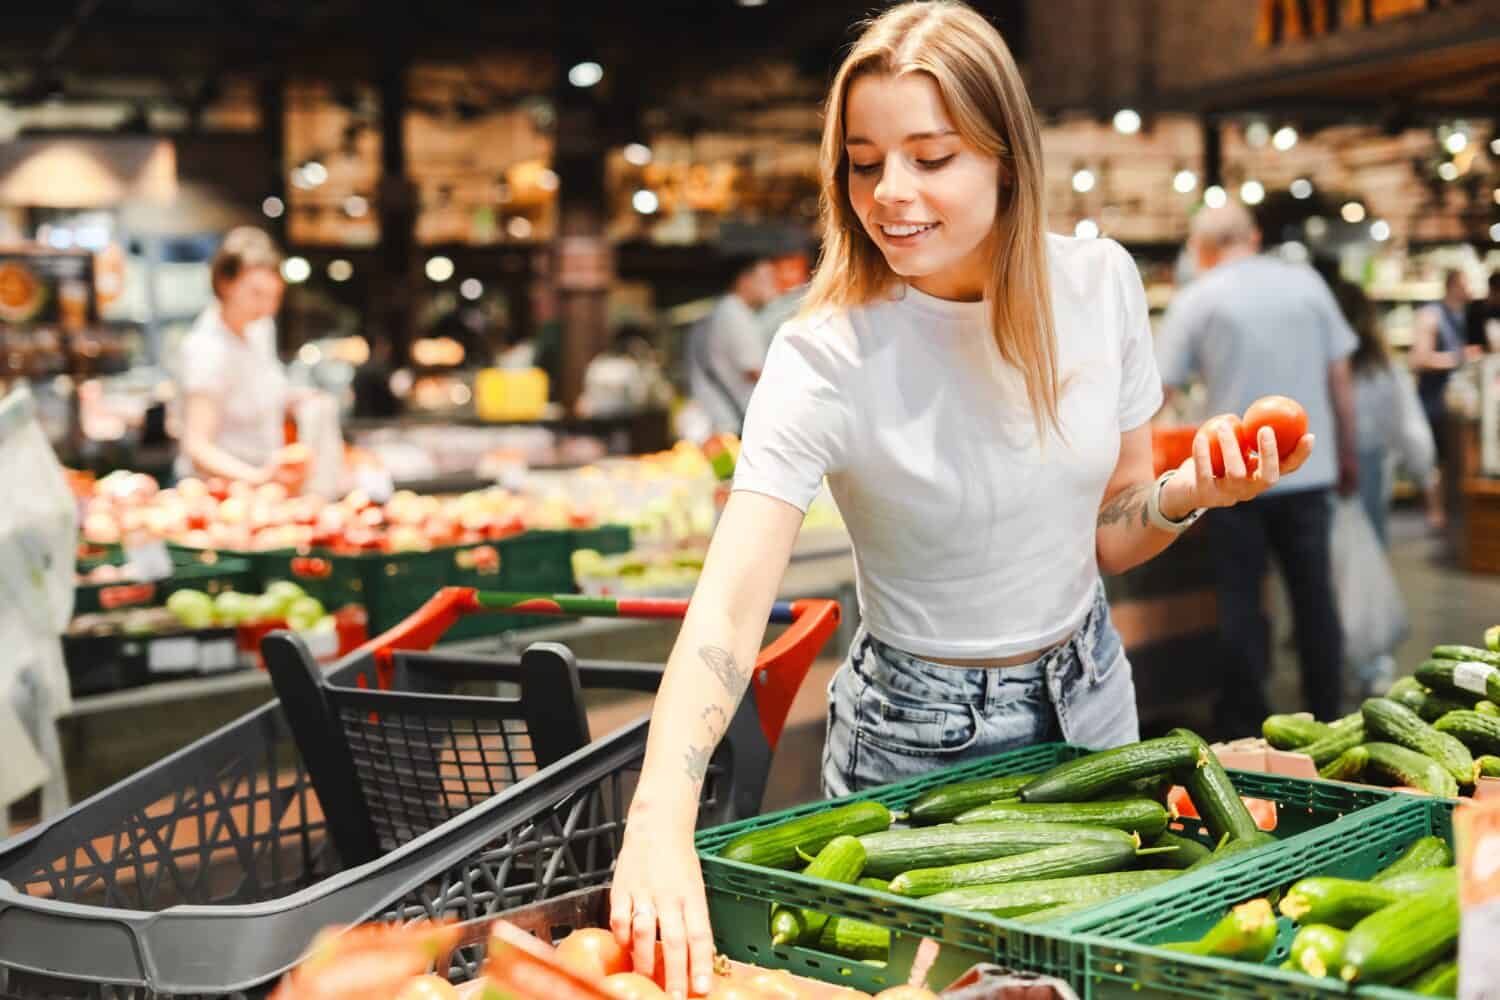 Young woman happily shops for fresh produce in a grocery store, selecting tomatoes and cucumbers for a healthy lifestyle. The vibrant vegetables stand out against a blurred background of shoppers